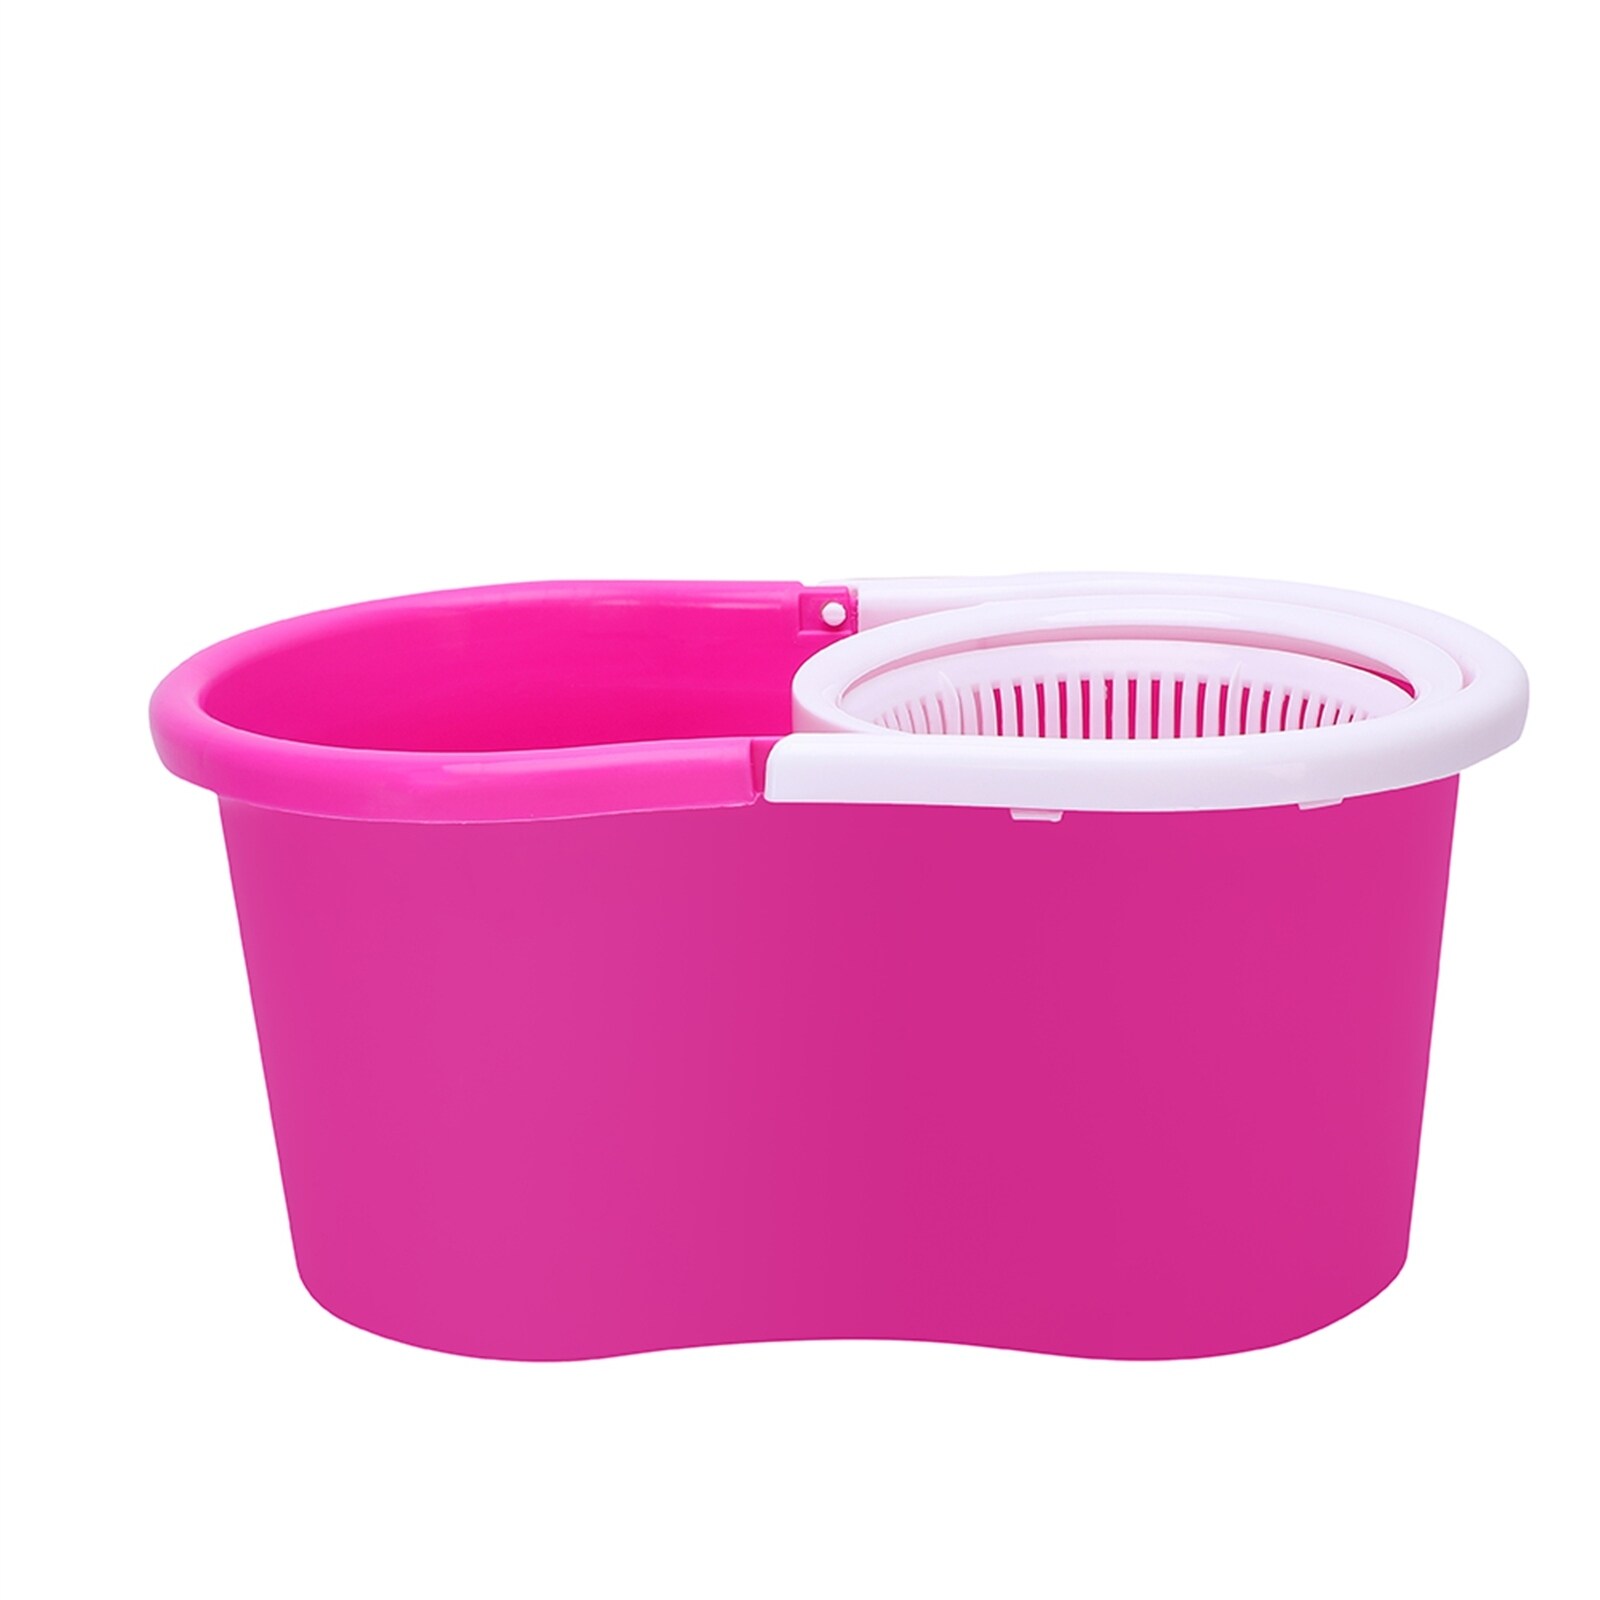 https://ak1.ostkcdn.com/images/products/is/images/direct/198aebc57a1afaae5a528310e4fcc690ce61cc49/360%C2%B0-Spin-Mop-with-Bucket-%26-Dual-Mop-Heads.jpg